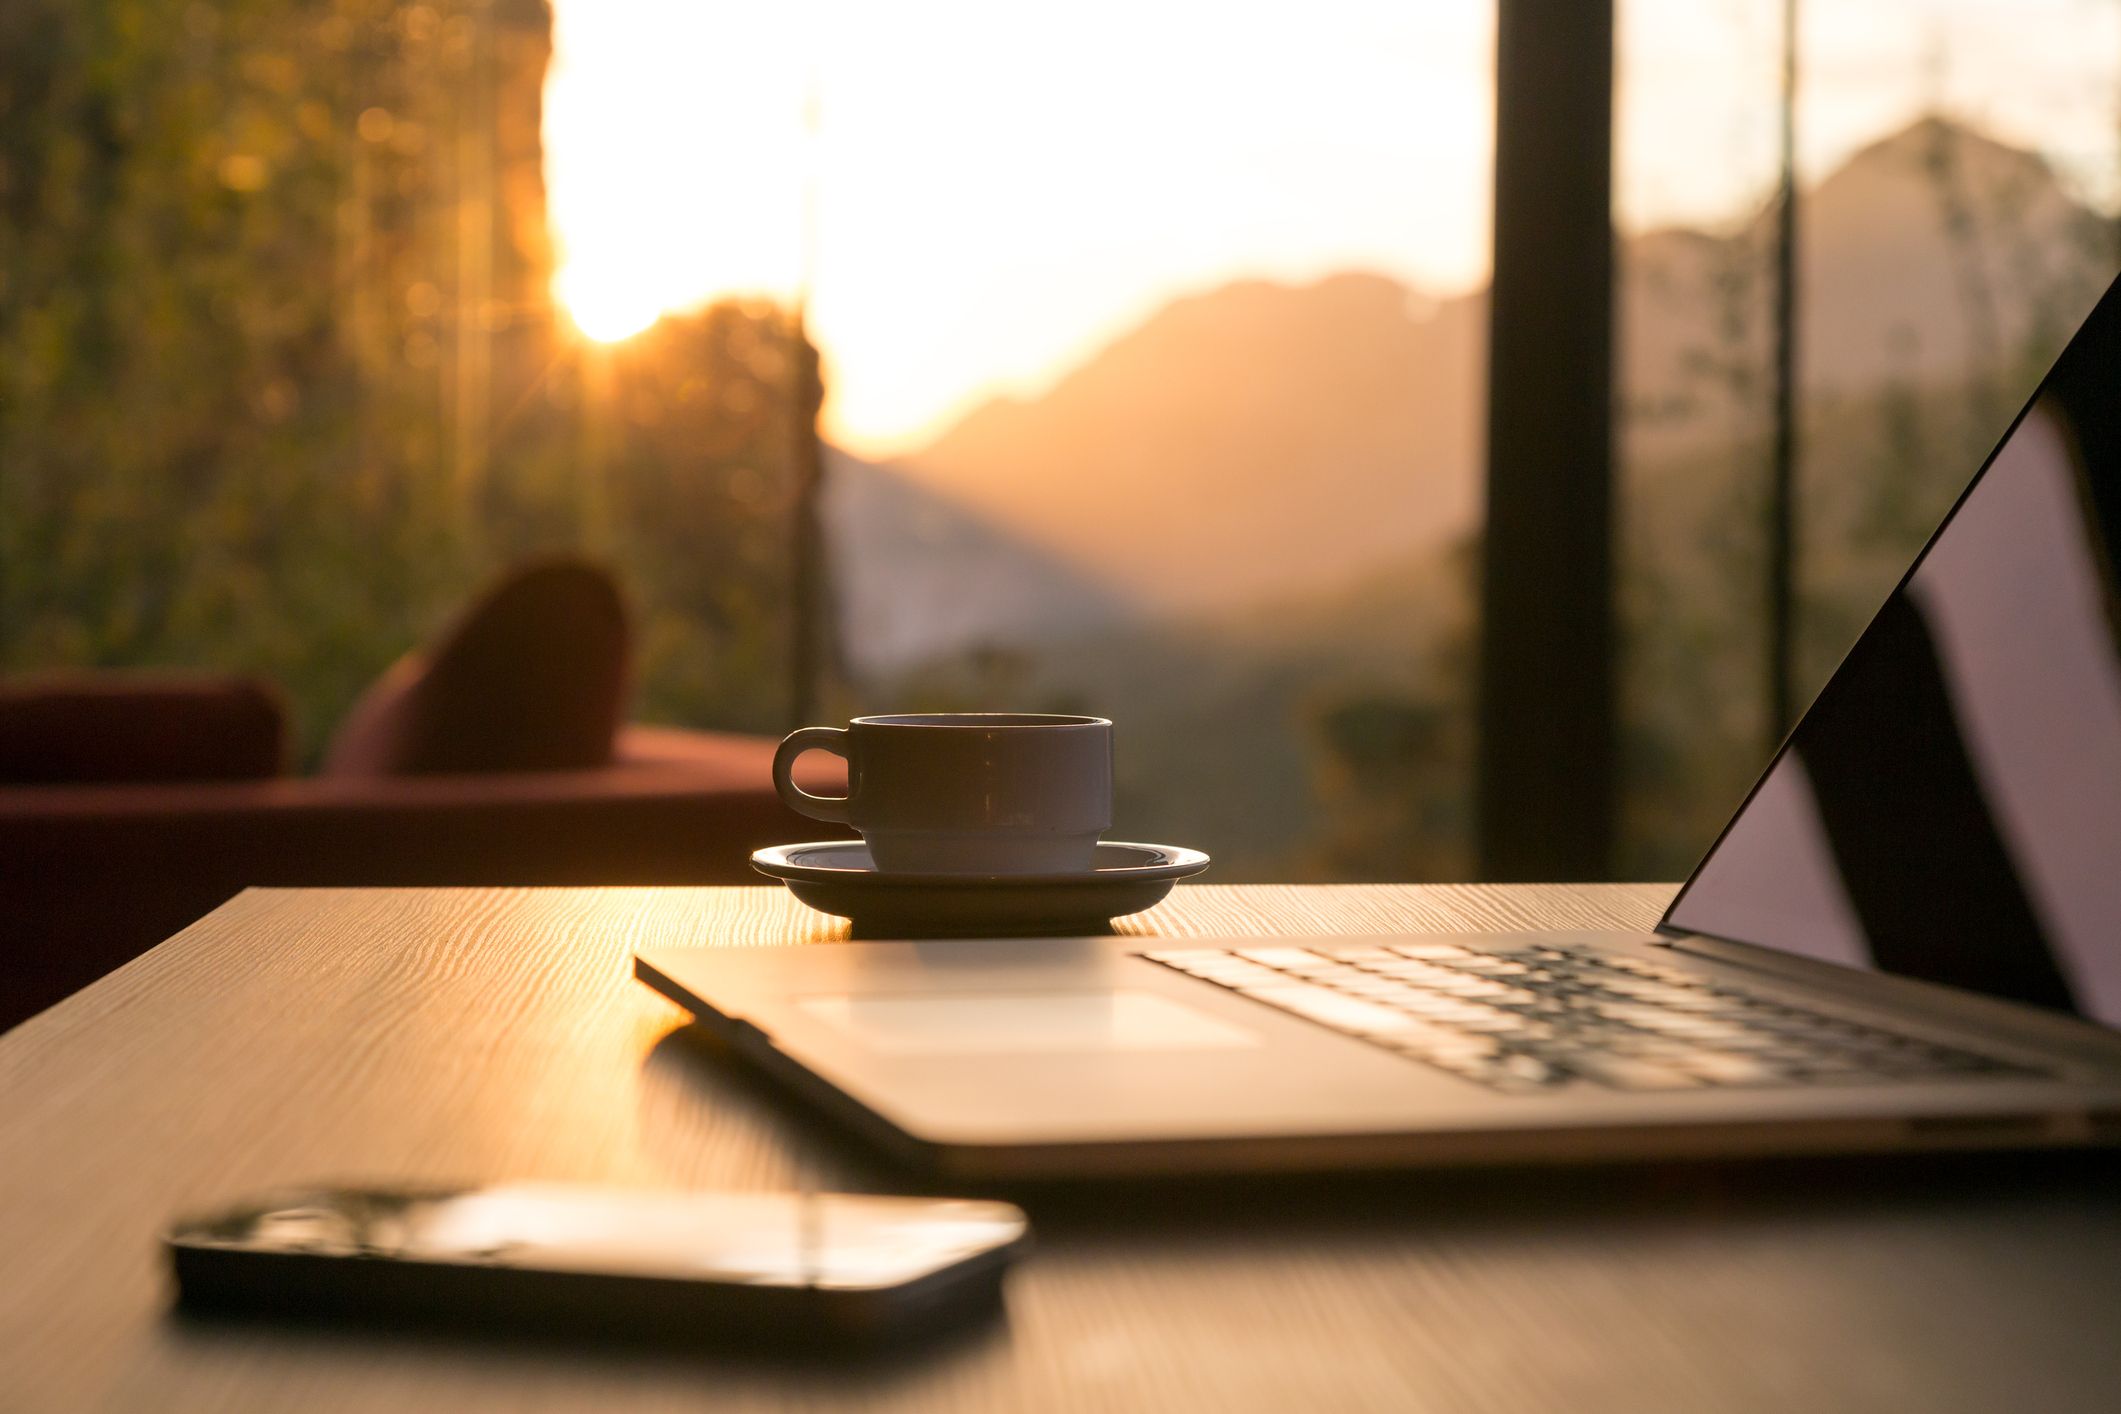 On a wooden table in a home office, a person is using a laptop while a cup of coffee and a smartphone are sitting on the table.